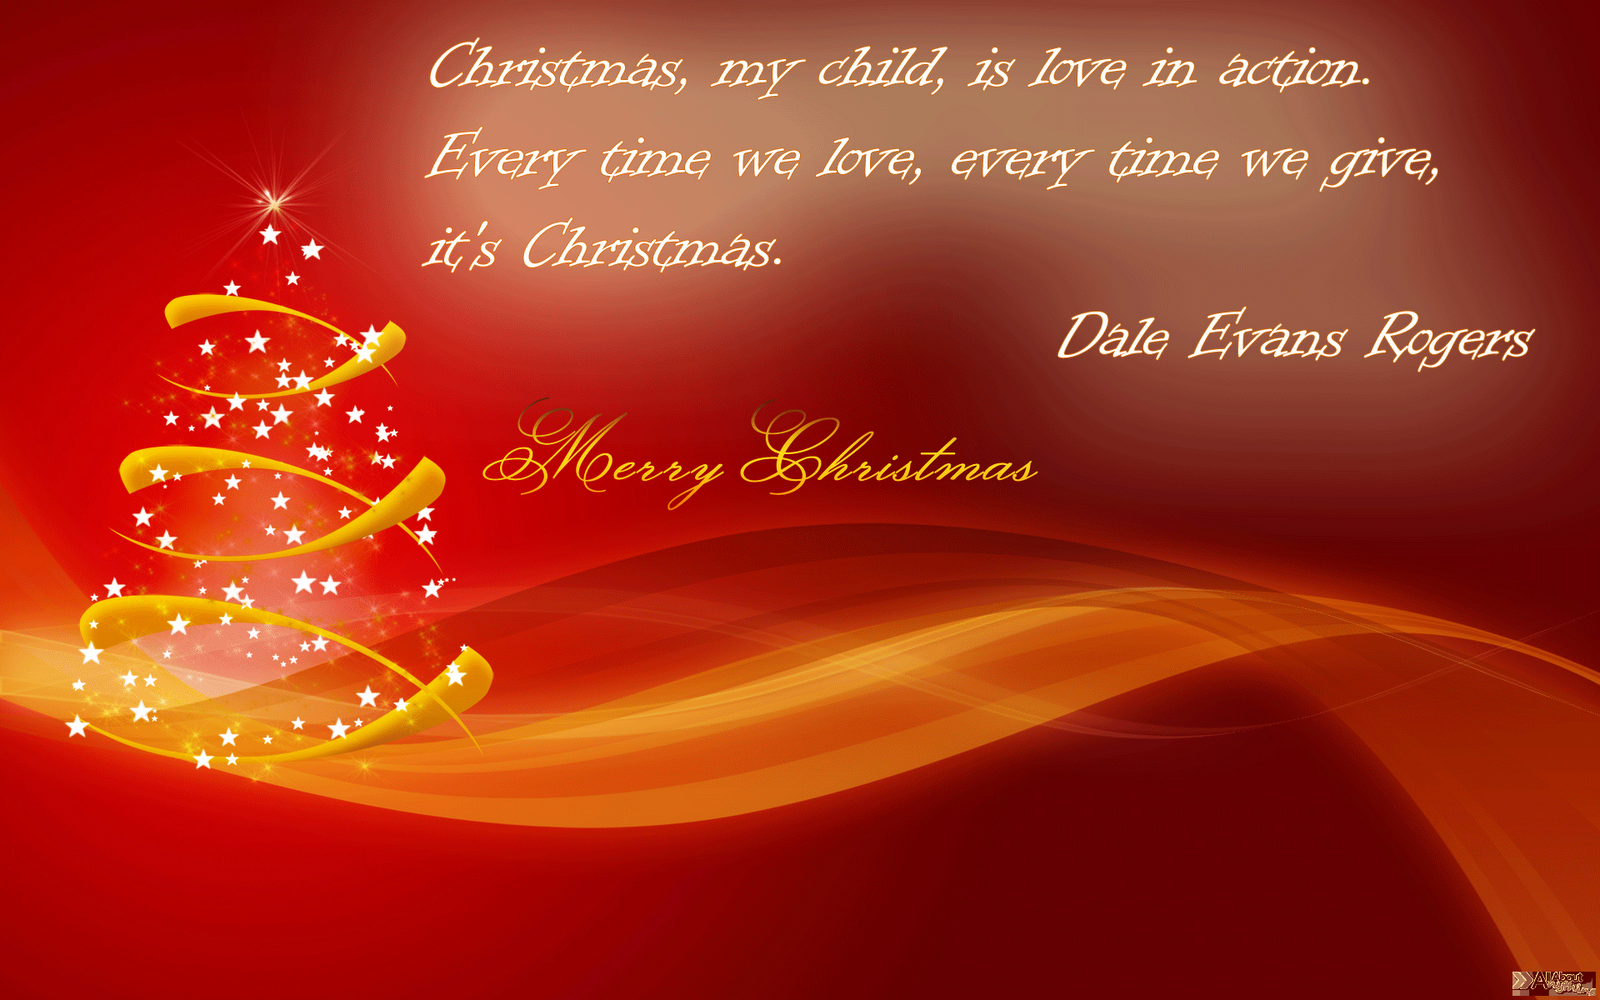 Greetings Quotes For Christmas quot;By Christmas Snowmanquot;  Greetingsforchristmas